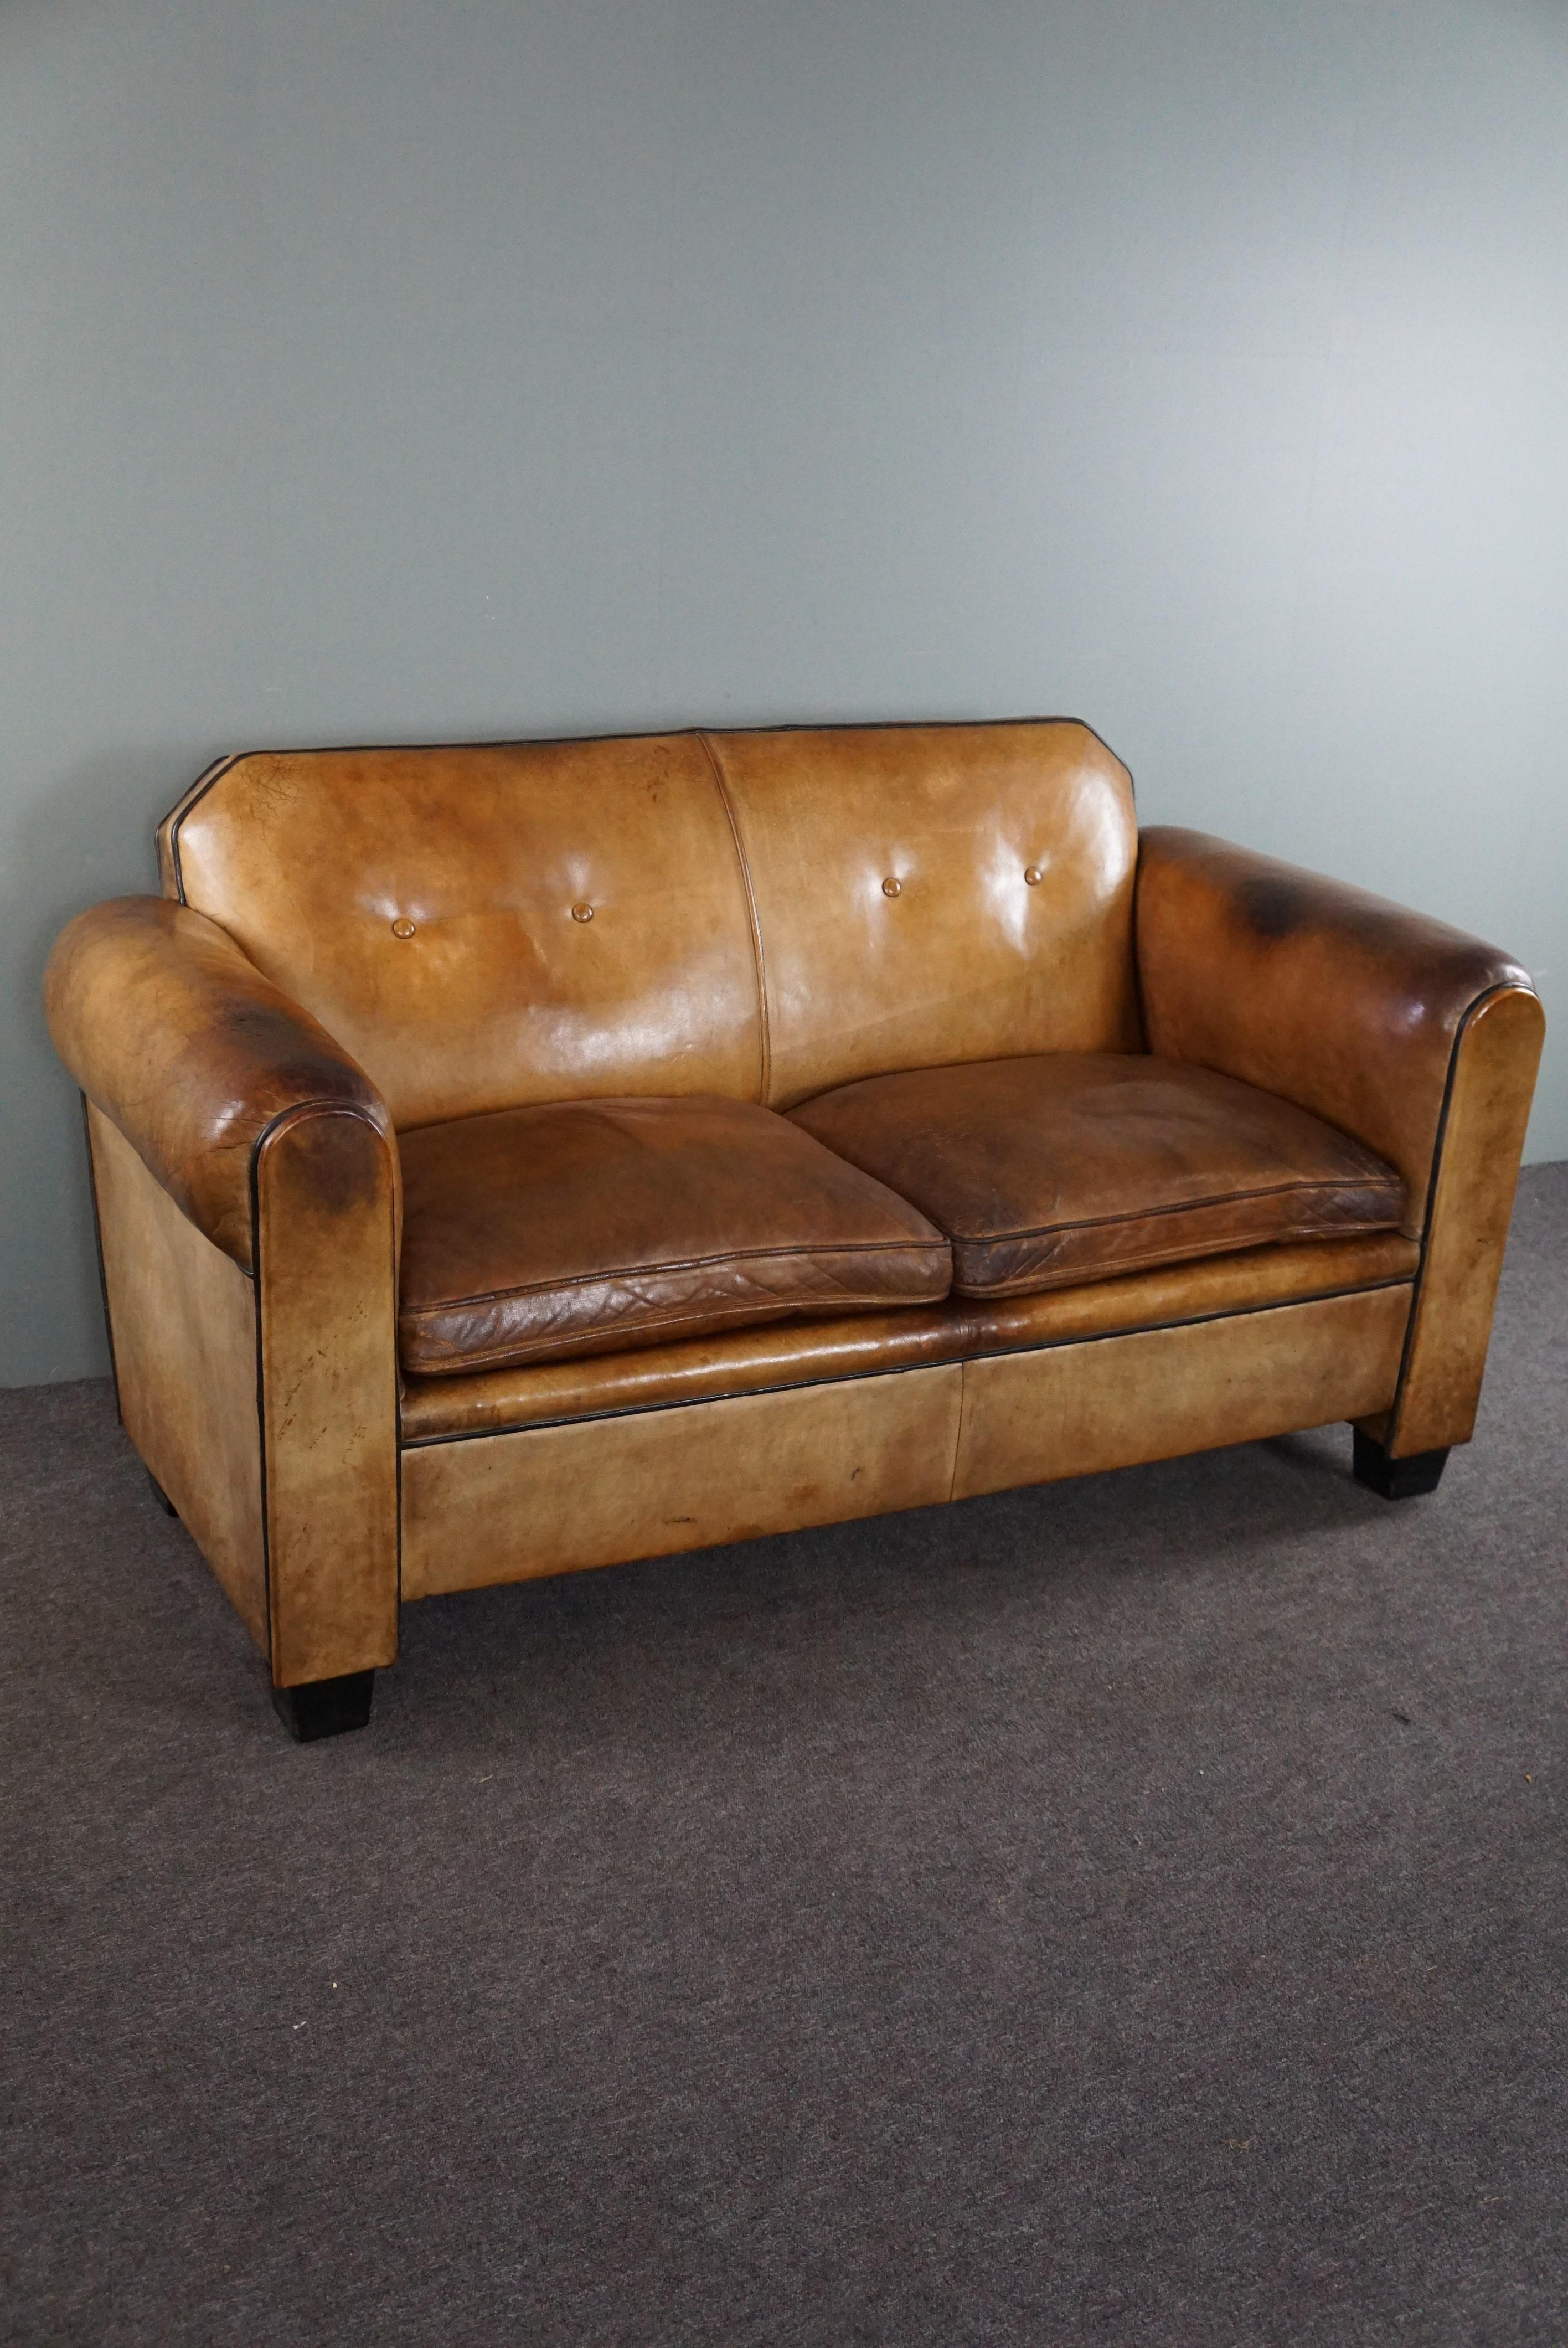 Offered is this sculptural sheep leather spacious 2-seater sofa designed by Bart van Bekhoven.

This striking pearl is not only spacious and comfortable, but also stately and grand in its appearance and design due to the color, patina and beautiful